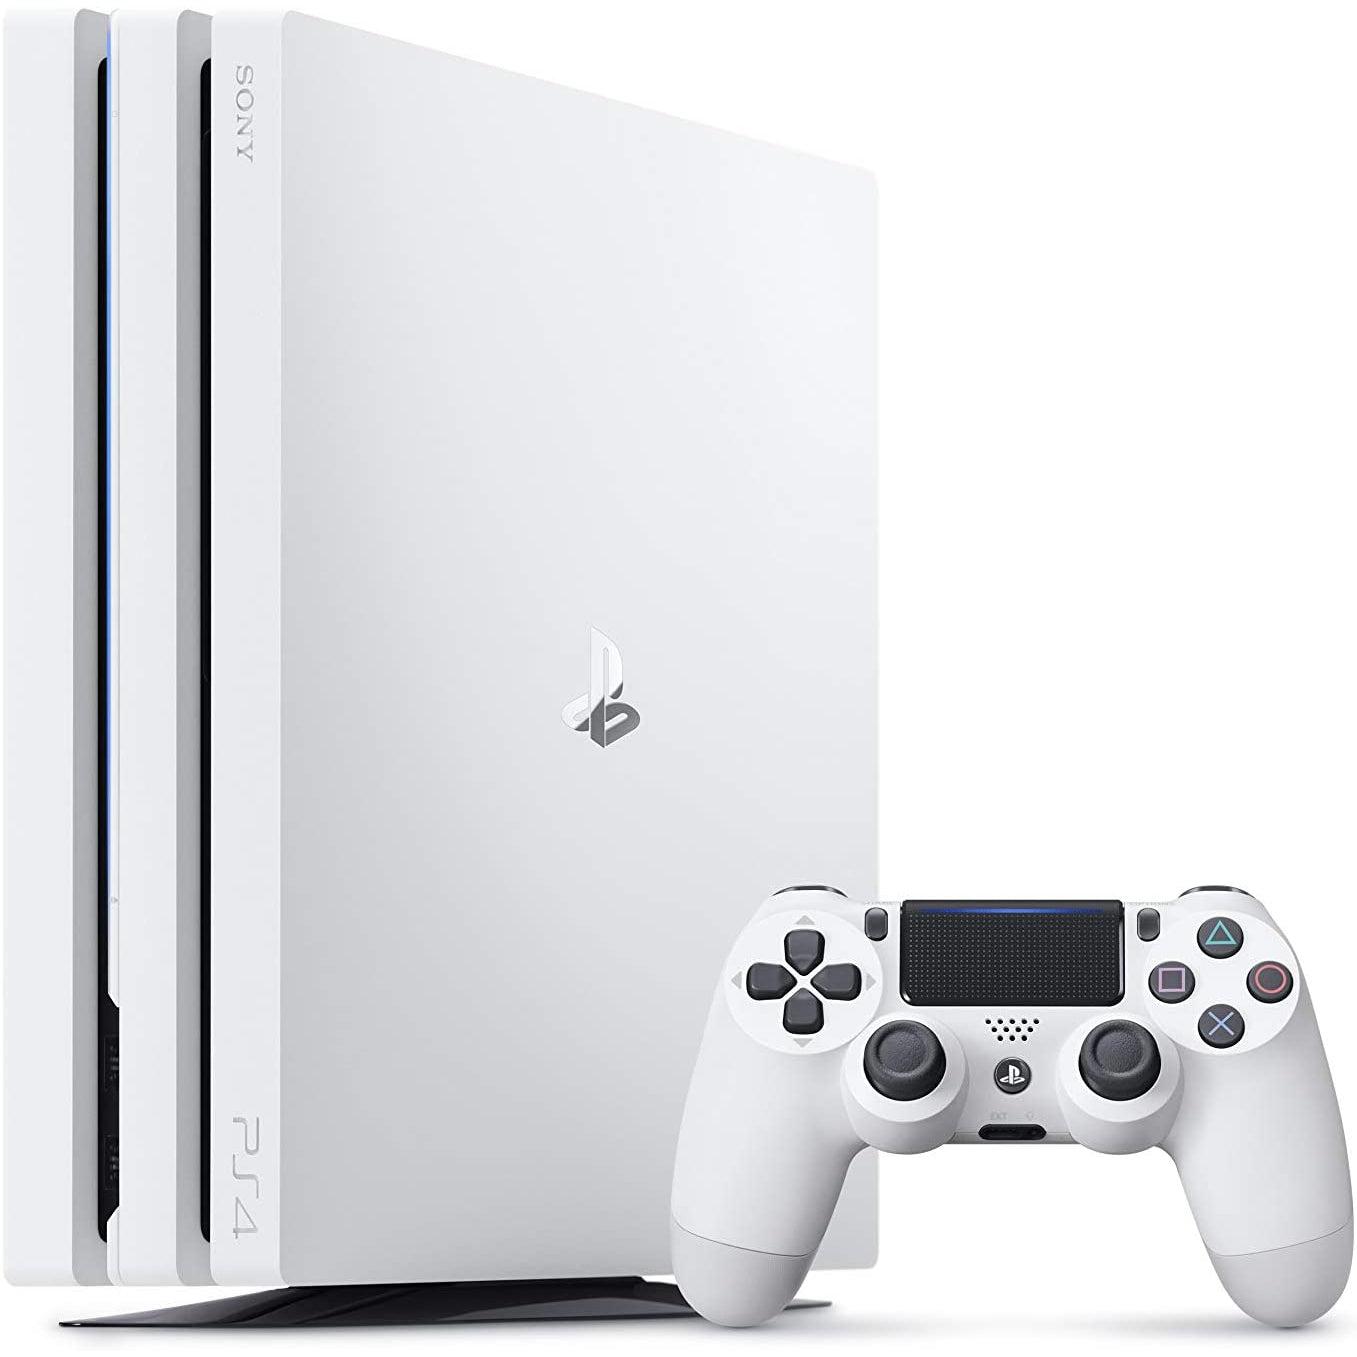 PlayStation 4 Pro 1TB White (PS4) - Refurbished Excellent